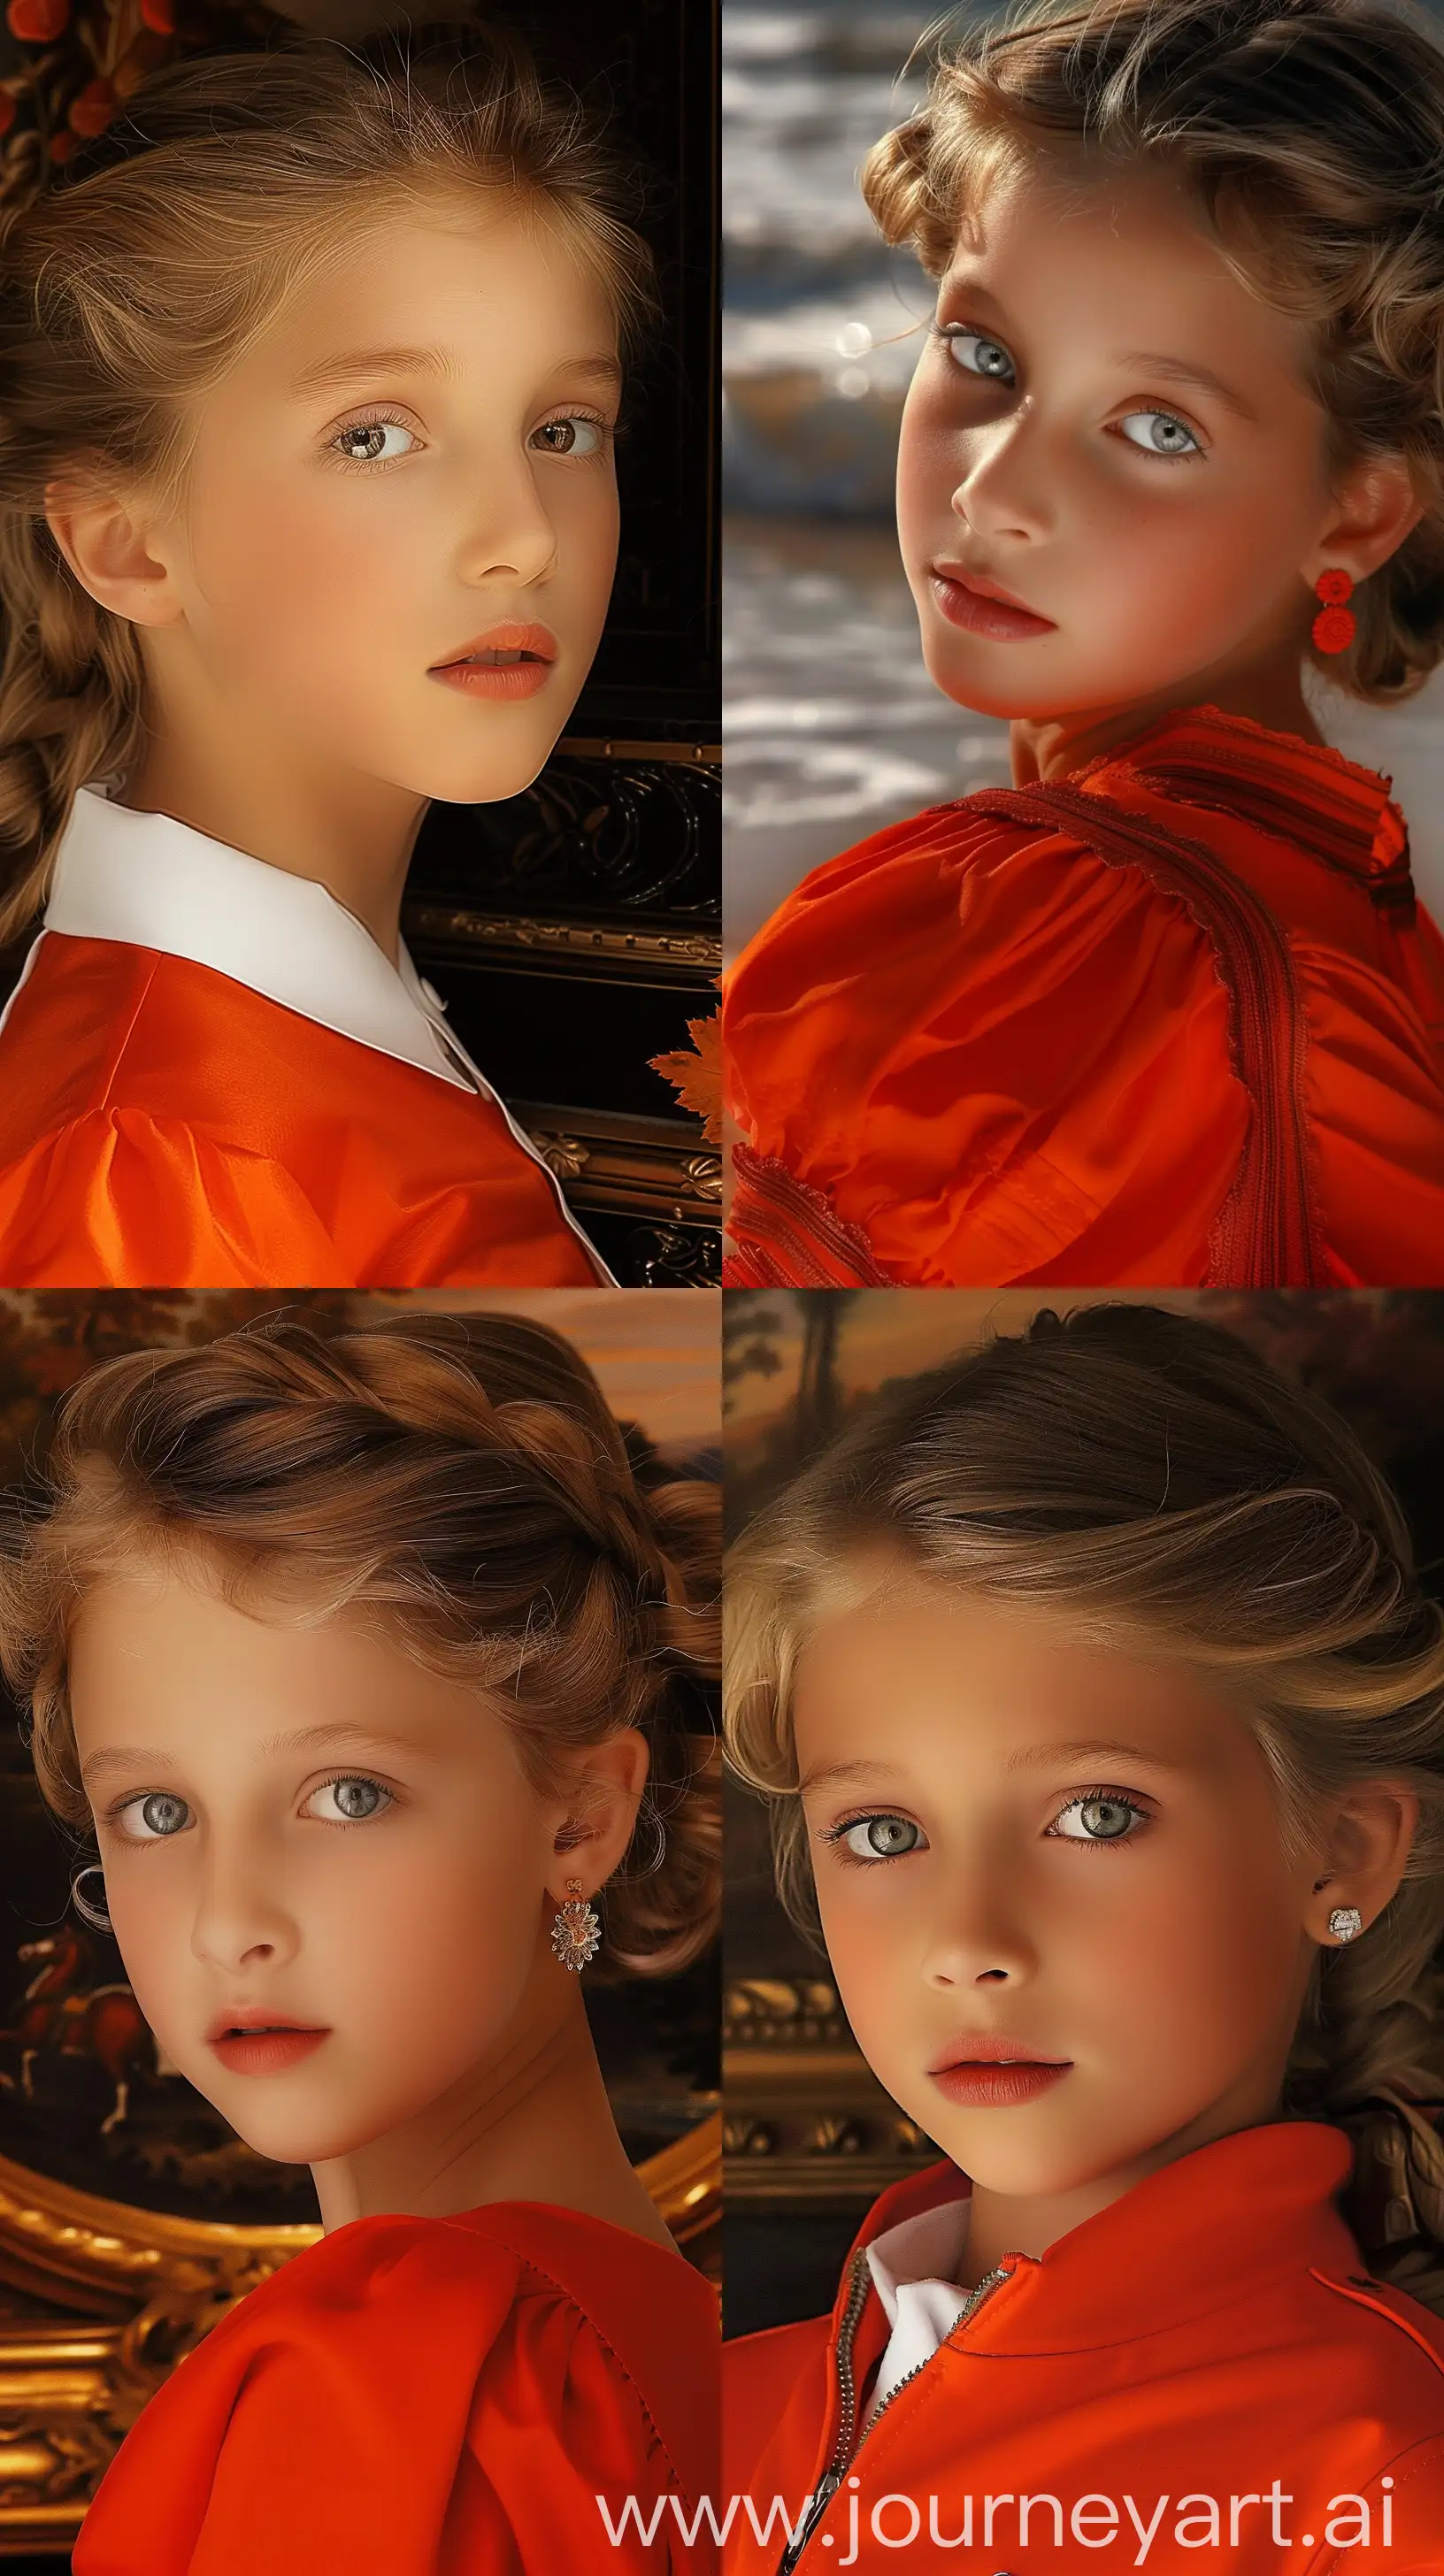 A young girl with a radiant and youthful face, representing purity and vivacityl --sref https://i.pinimg.com/originals/34/2b/7a/342b7a4f2a4fd7aa567f1c0e69387591.jpg --style raw --v 6 --ar 9:16 